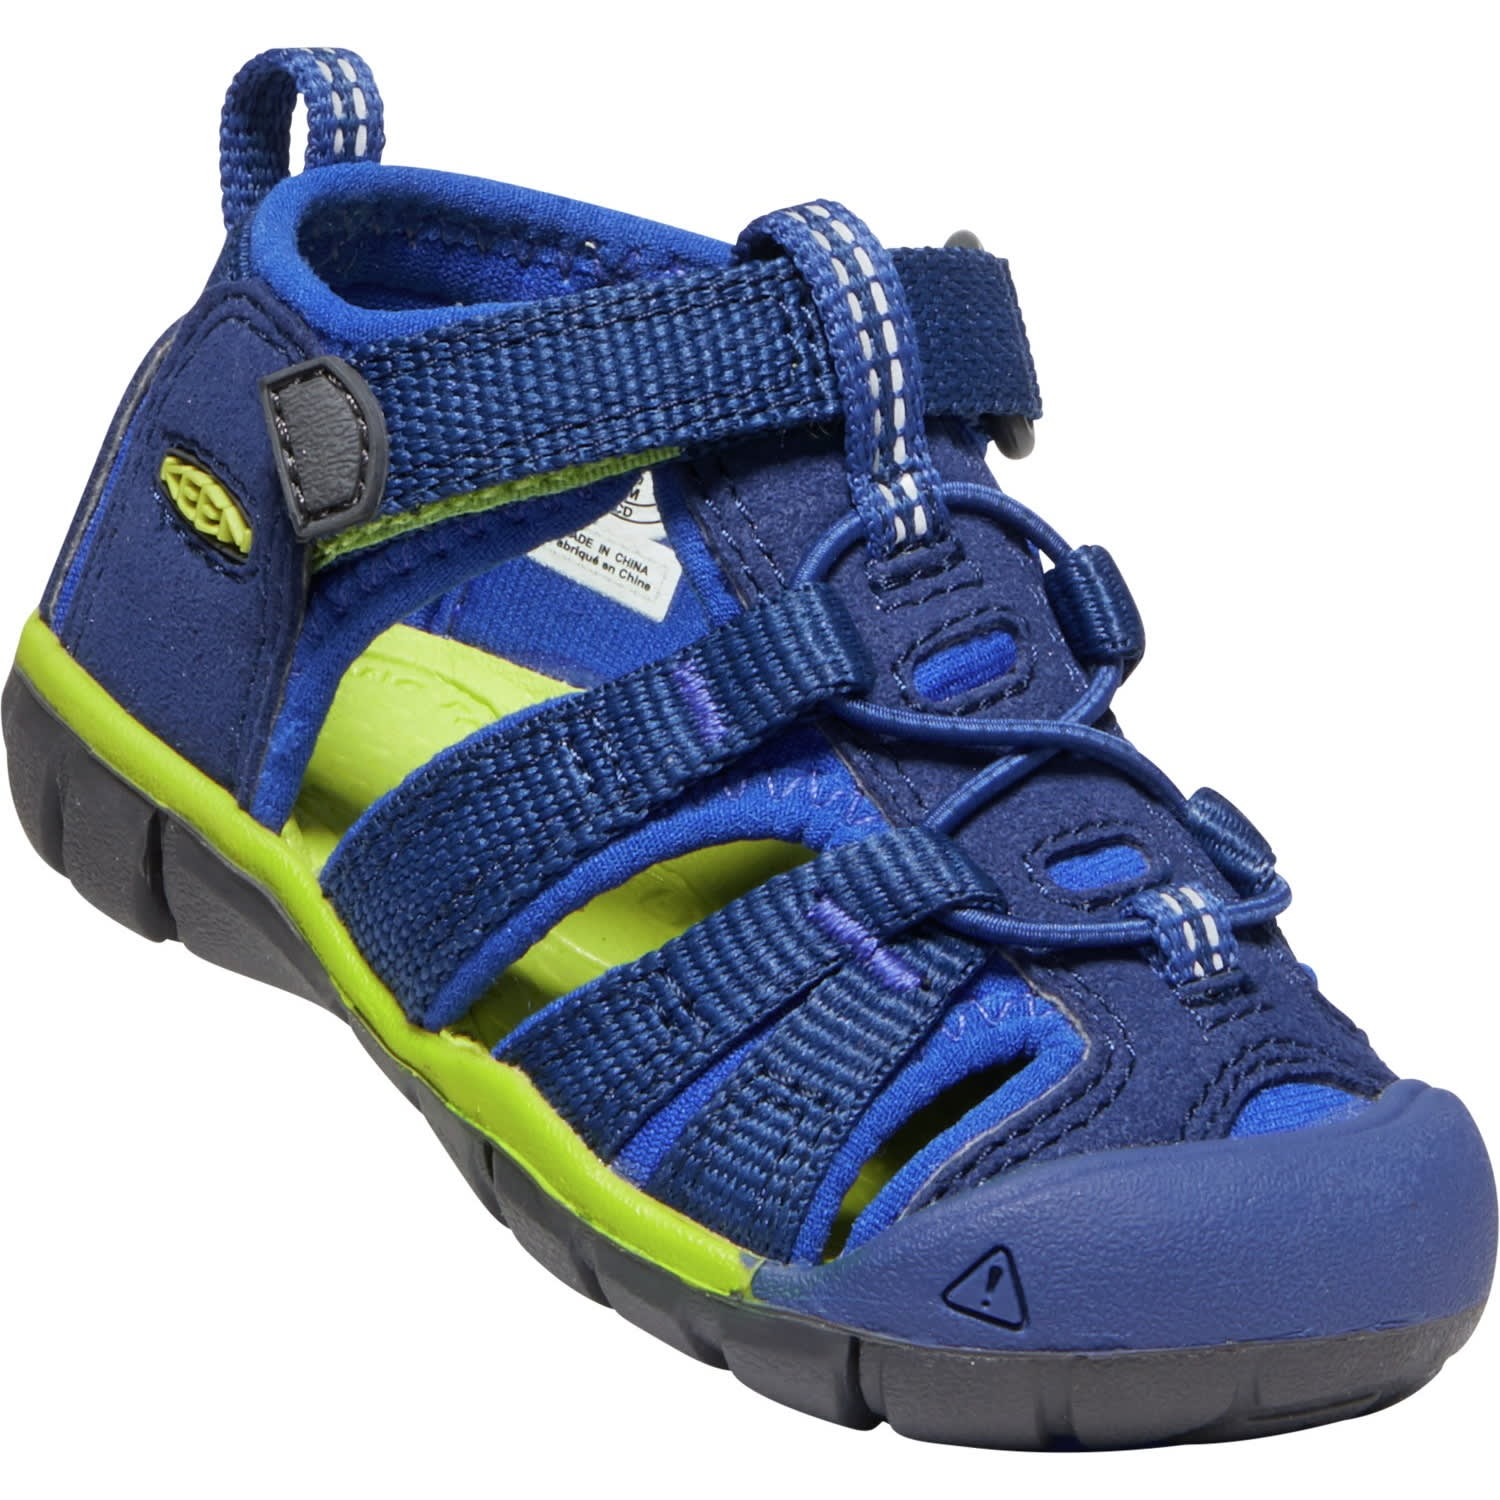 Buy Keen Toddlers' Seacamp II CNX from Outnorth